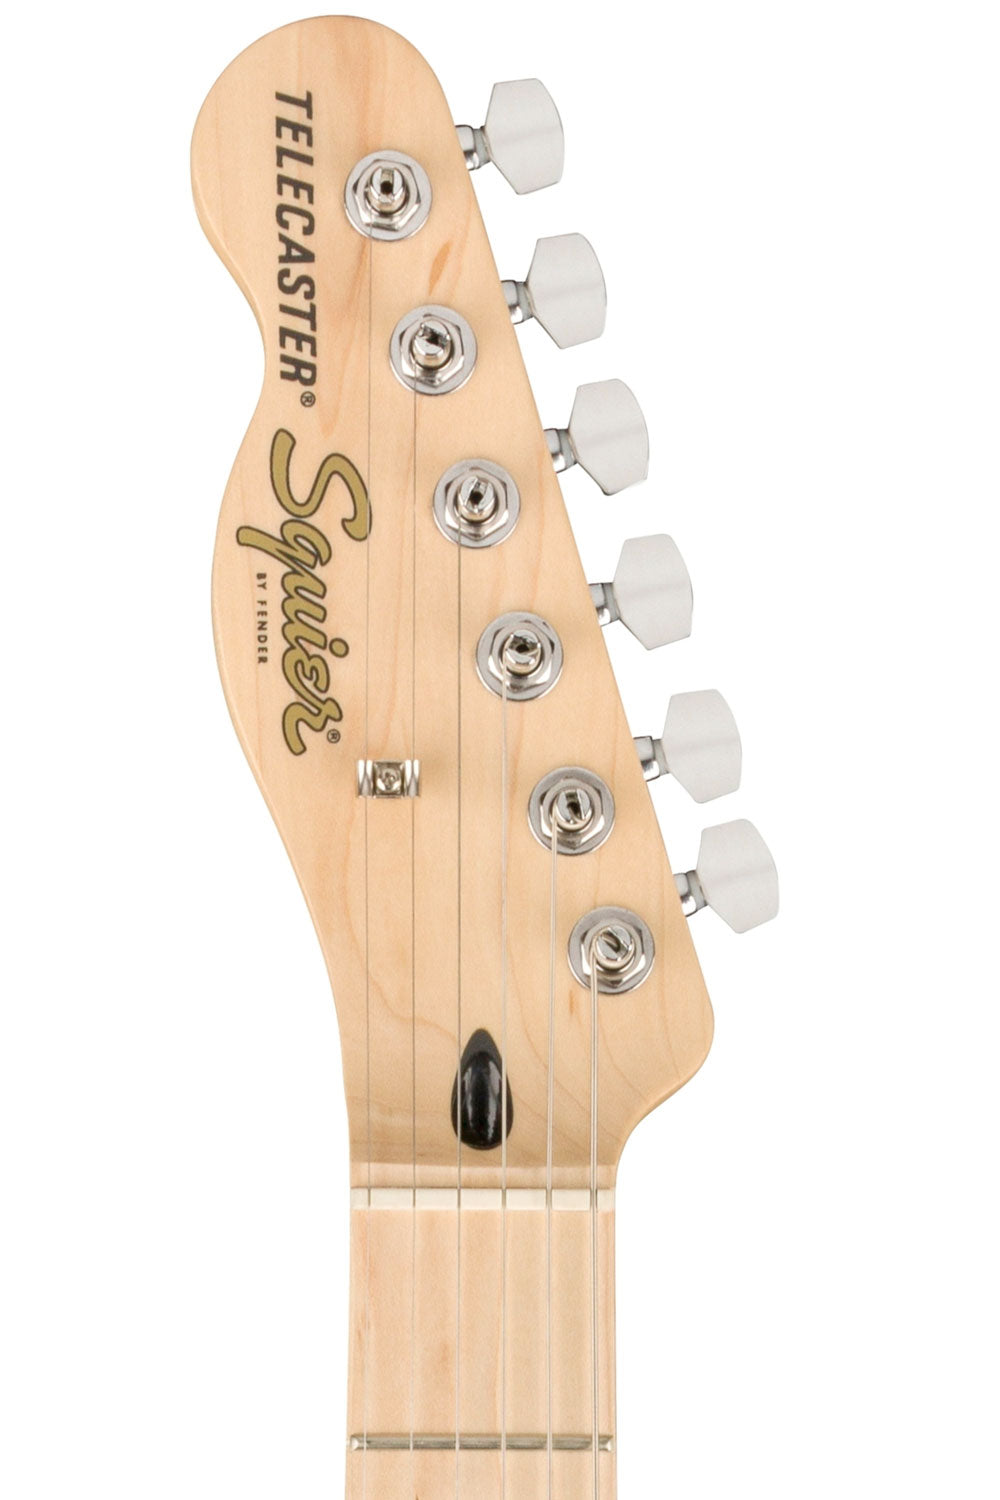 Squier Affinity Series Telecaster Left Handed with Maple Fingerboard - Butterscotch Blonde